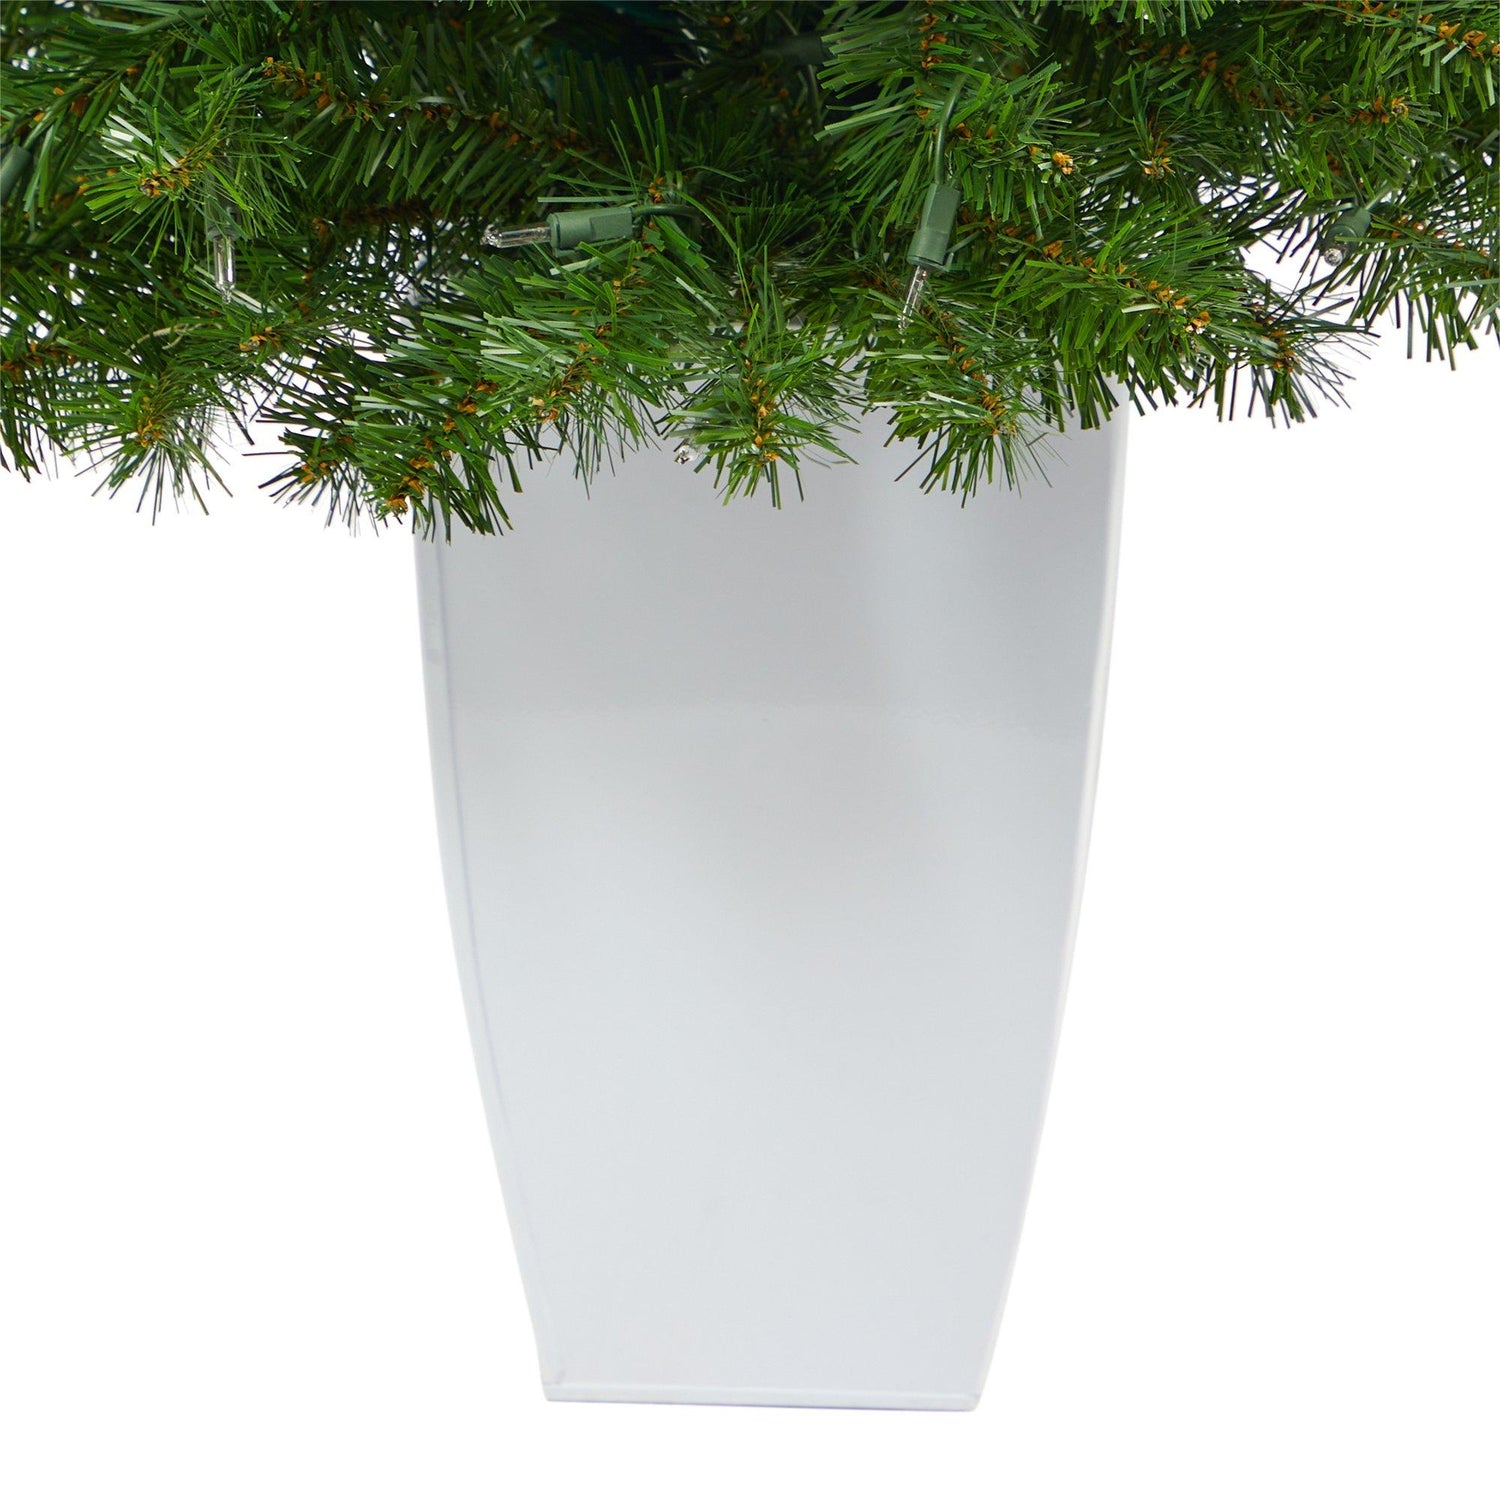 50” Virginia Fir Artificial Christmas Tree with 100 Clear Lights and 223 Bendable Branches in White Metal Planter